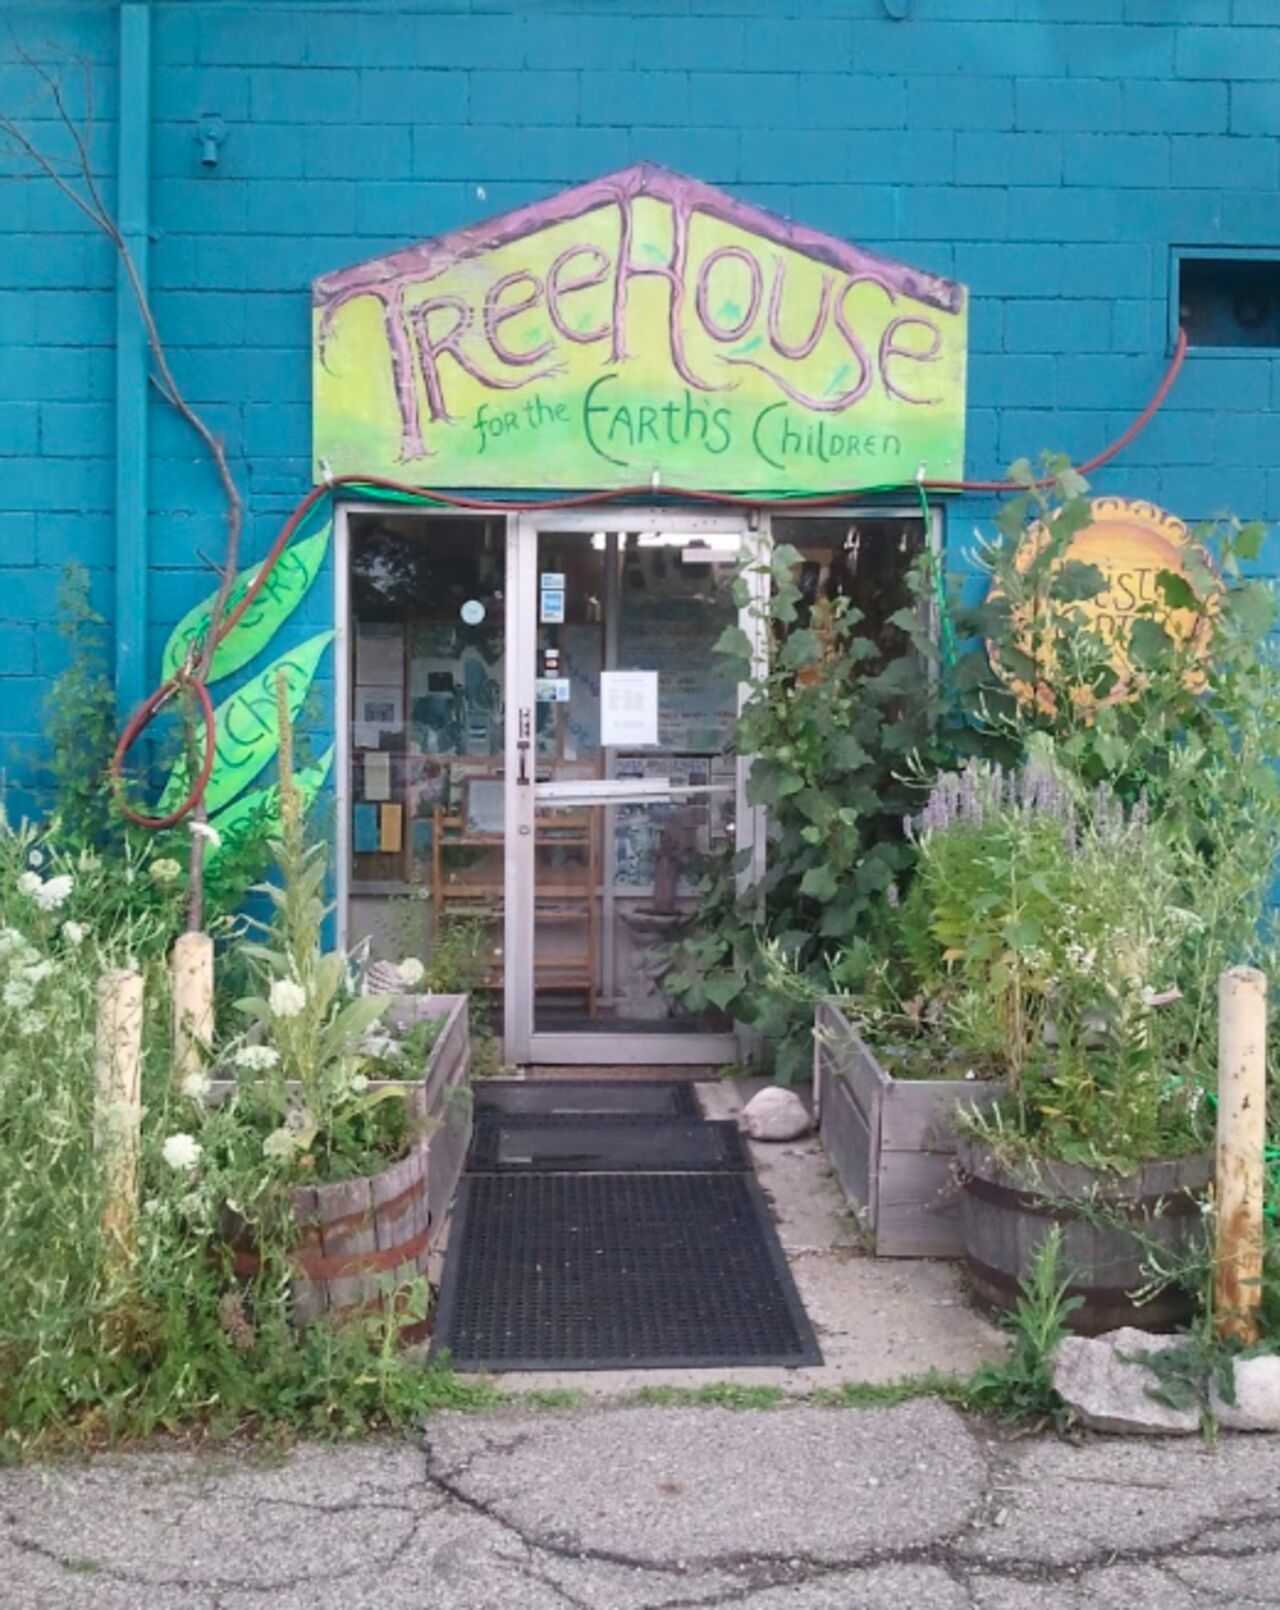 A photo of Treehouse for the Earth's Children